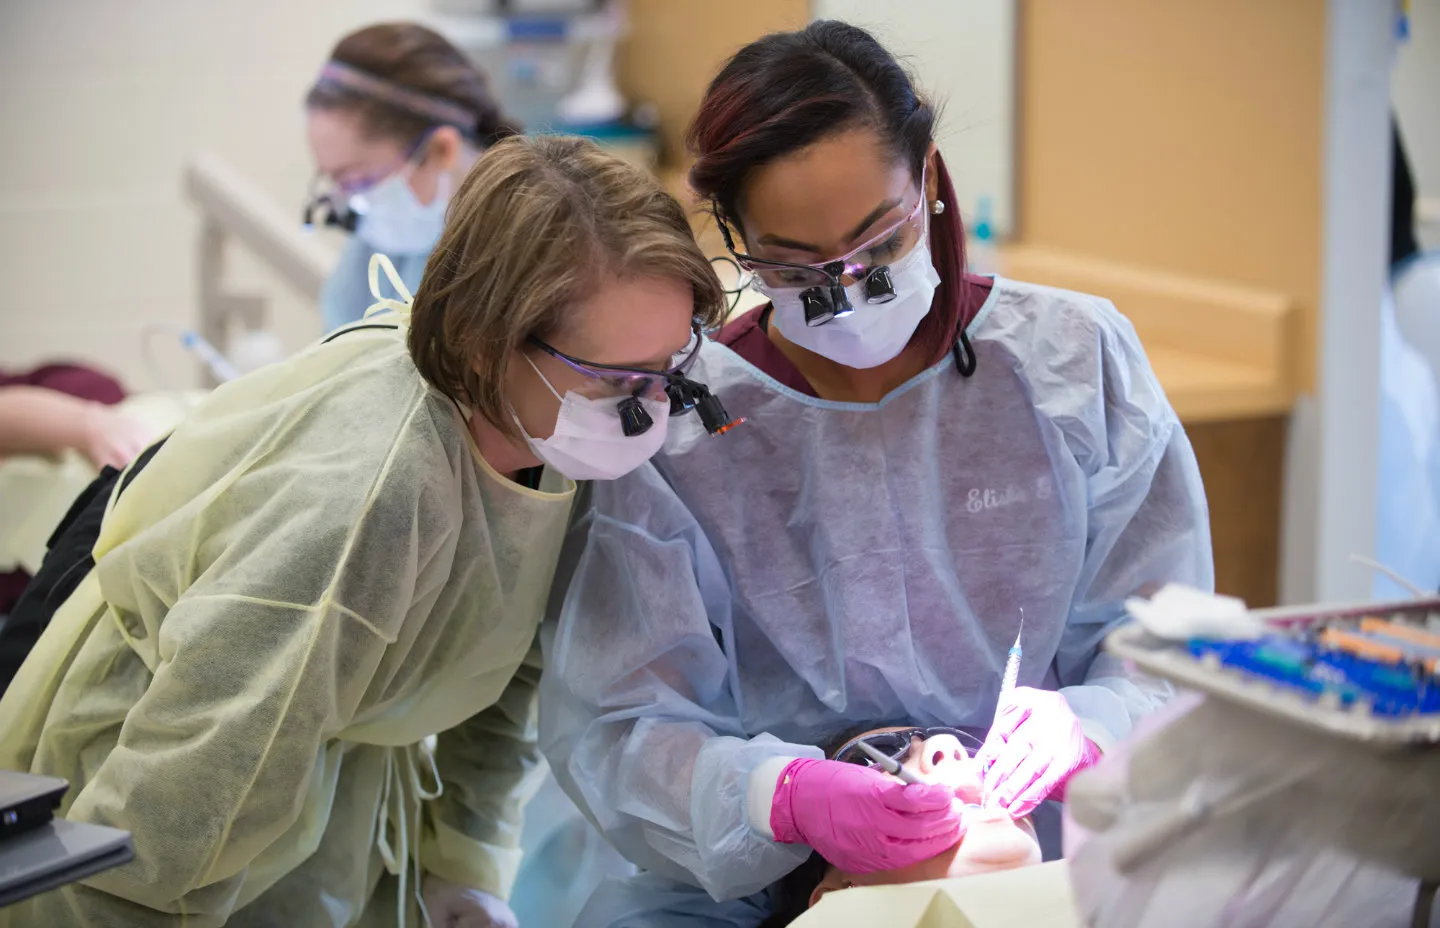 Two dental hygiene students in surgical scrubs and masks work on a patient